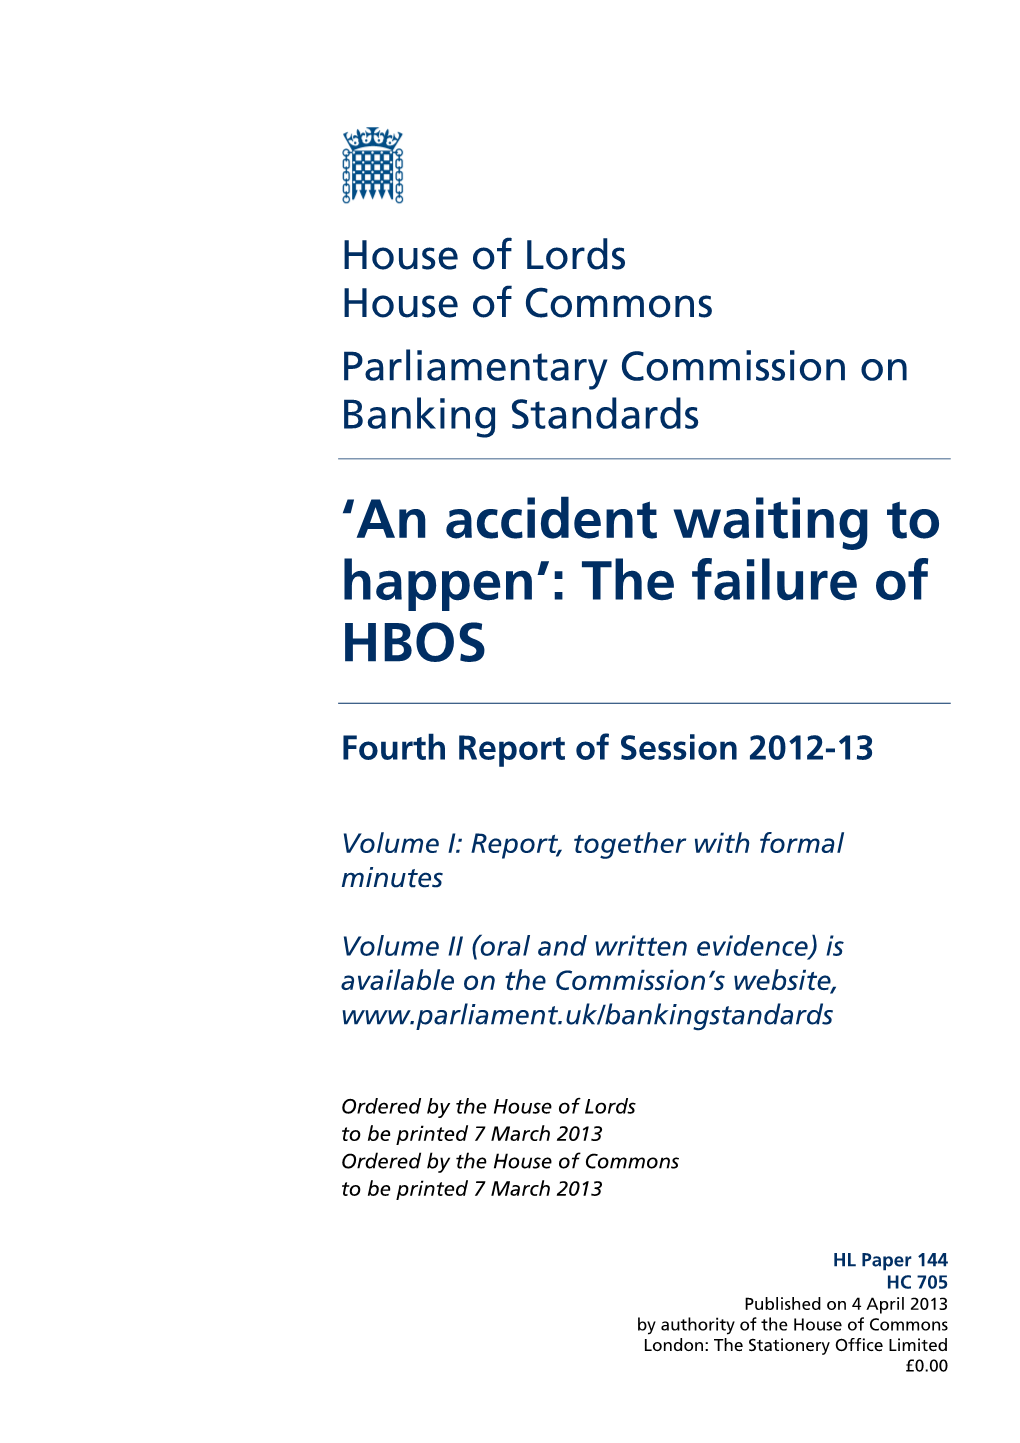 An Accident Waiting to Happen’: the Failure of HBOS